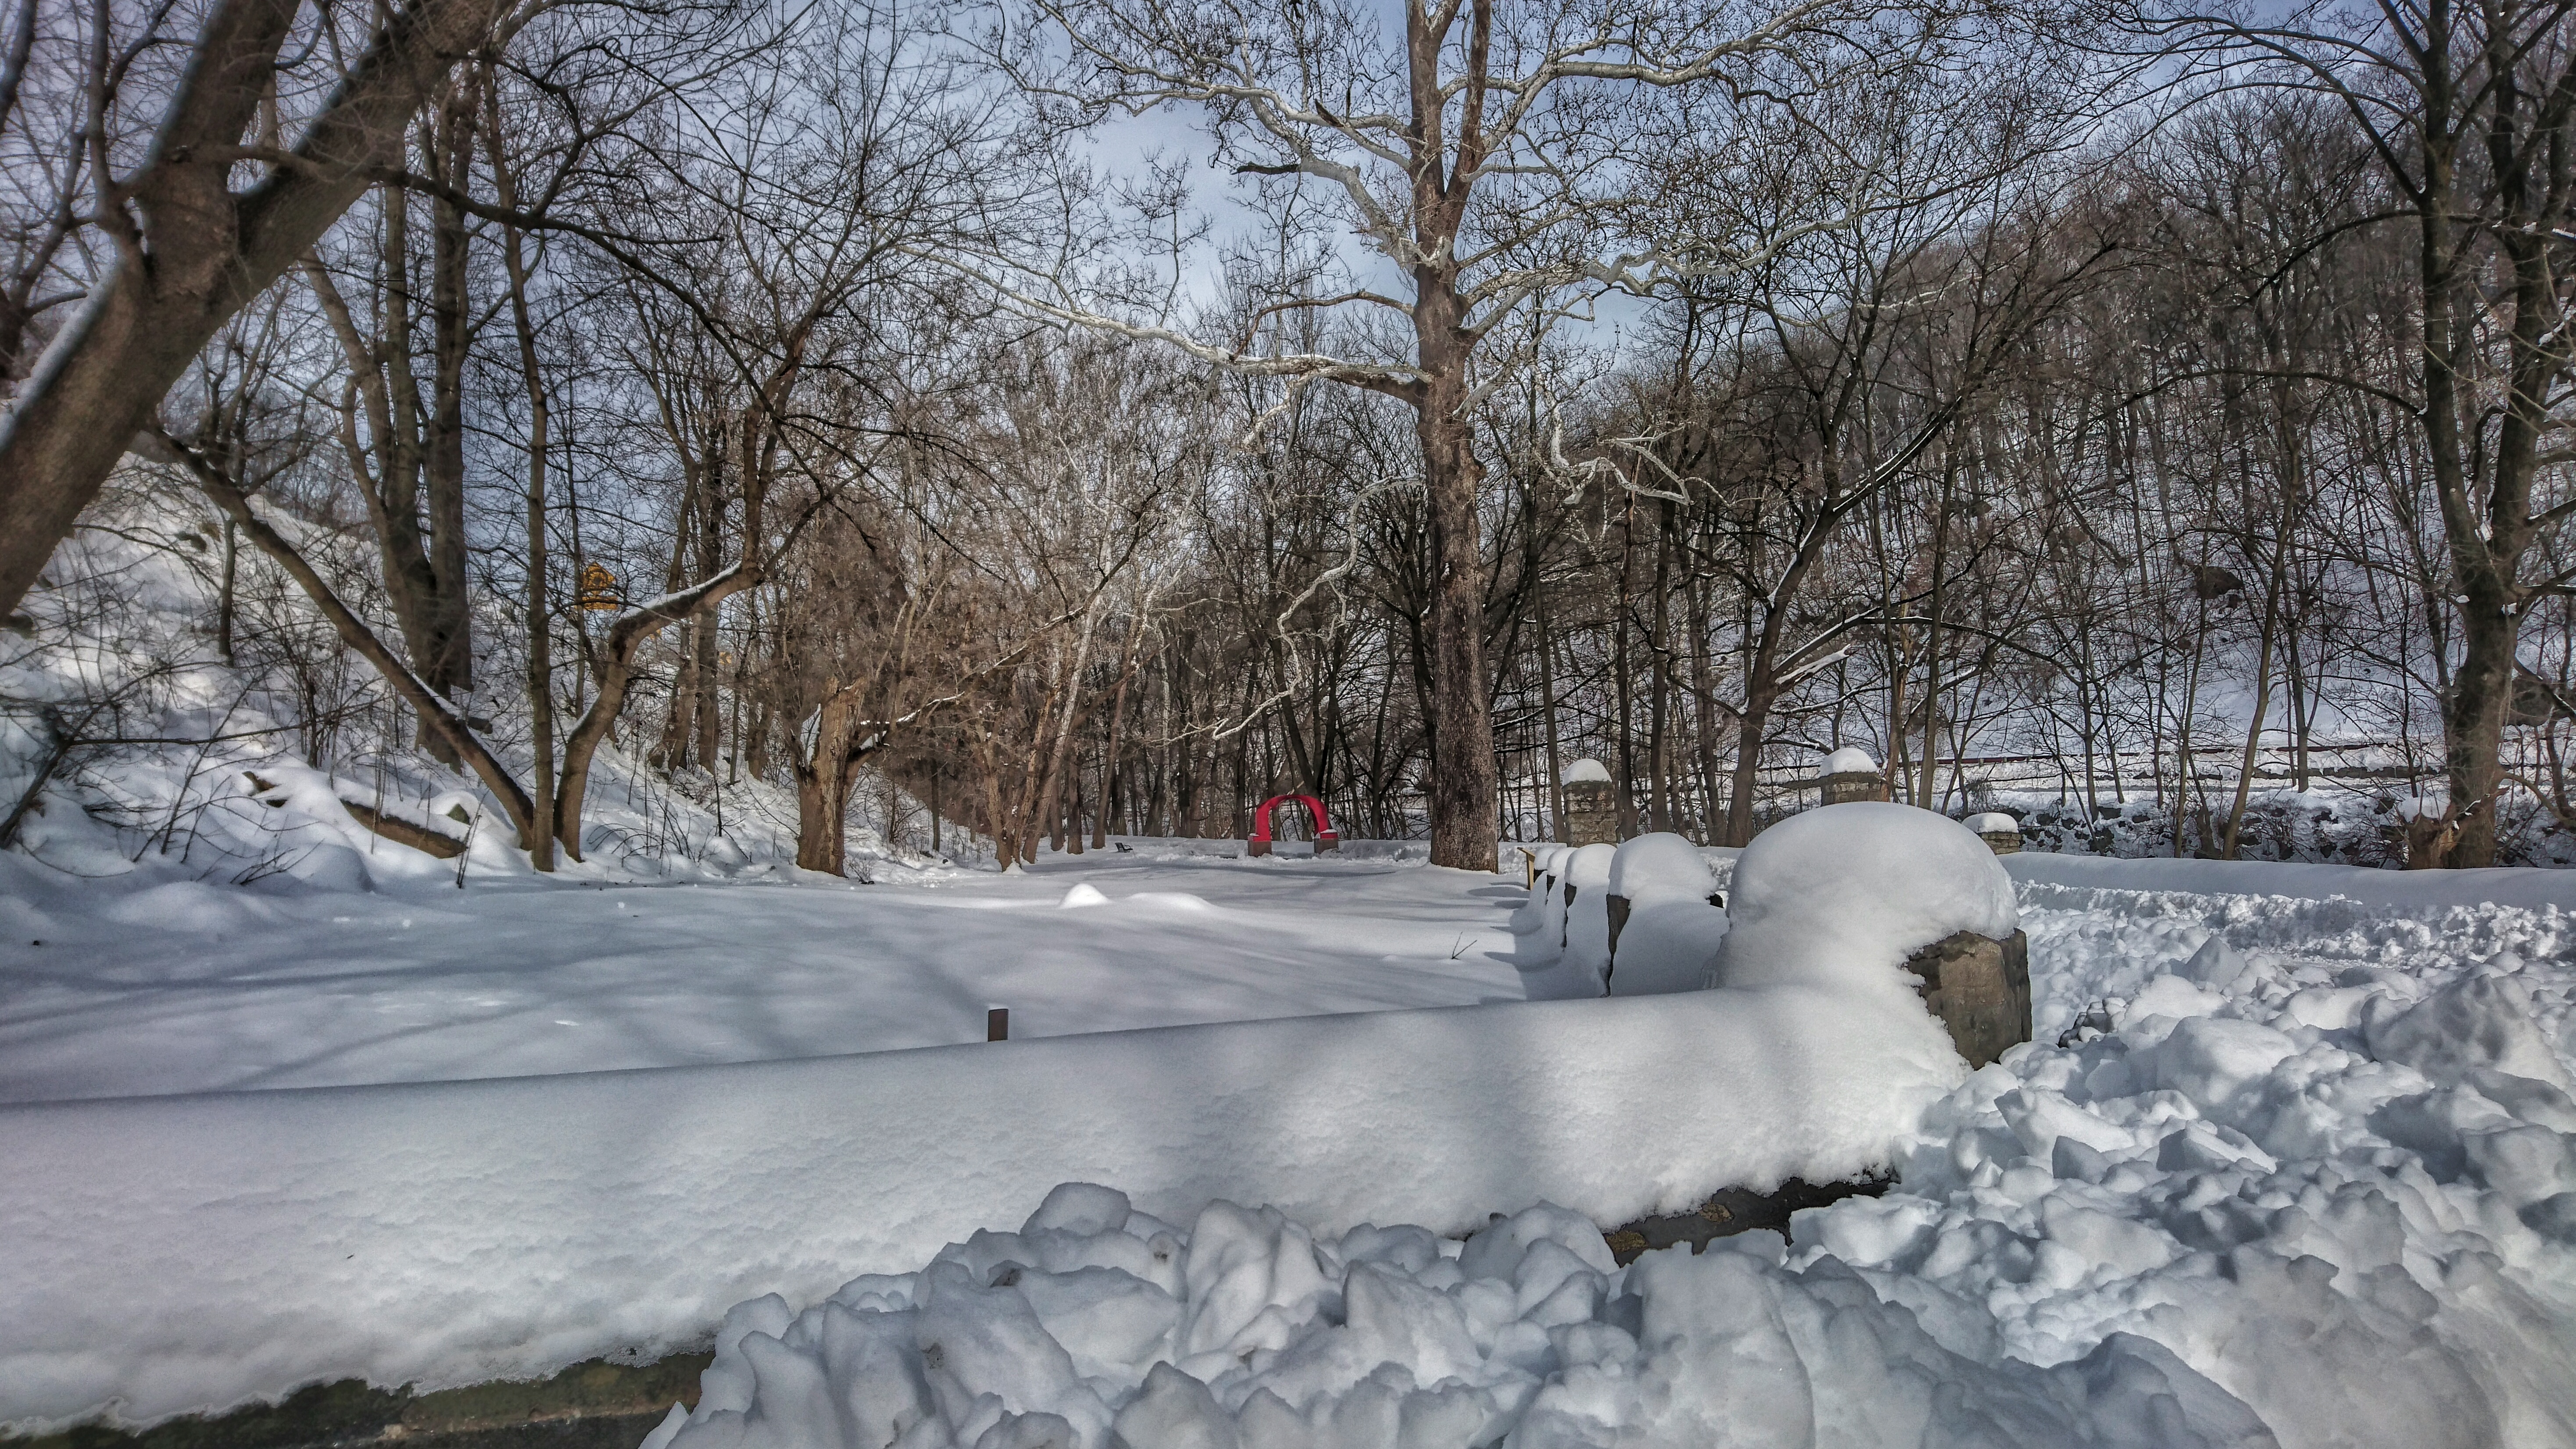 Snow covers the Karl Stirner Arts Trail in Easton, Pennsylvania.